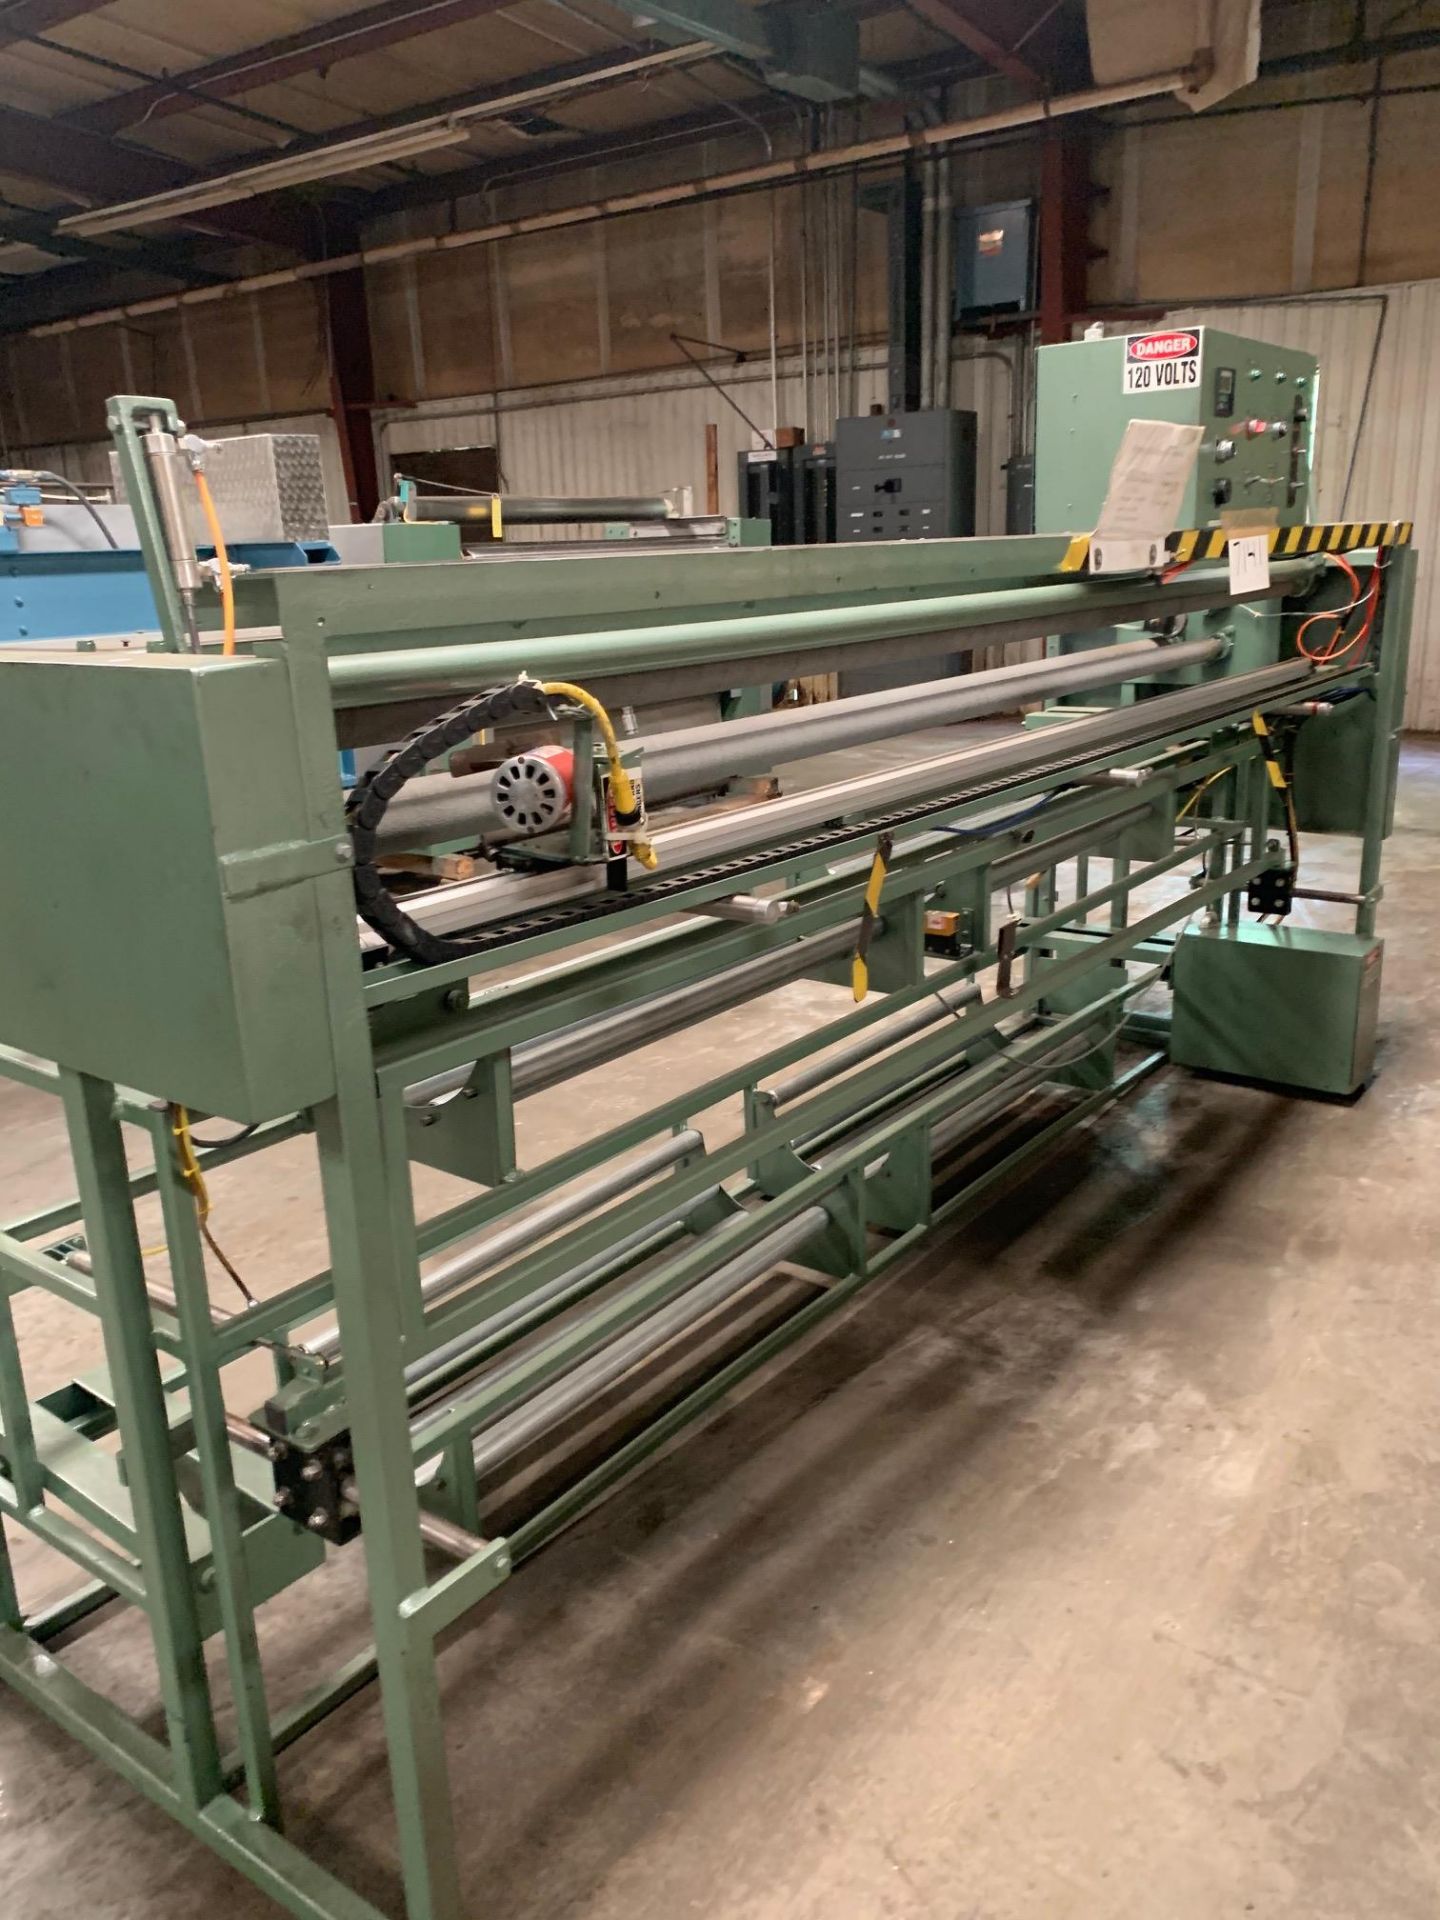 Cutting panels machine 10' 120 volts, Rigging Fee: $150 - Image 2 of 13